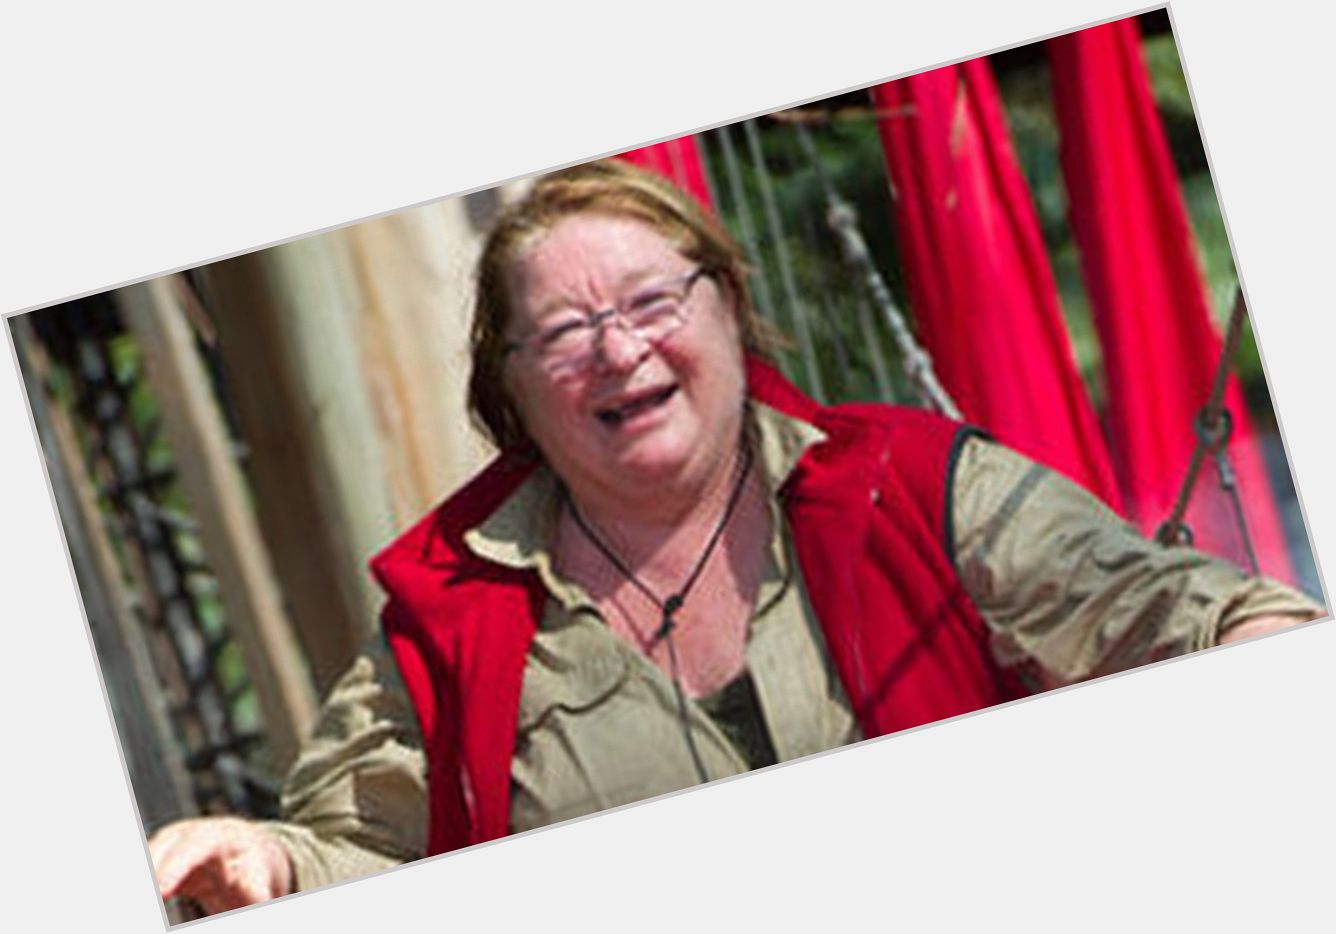 Https://fanpagepress.net/m/R/Rosemary Shrager Where Who 7